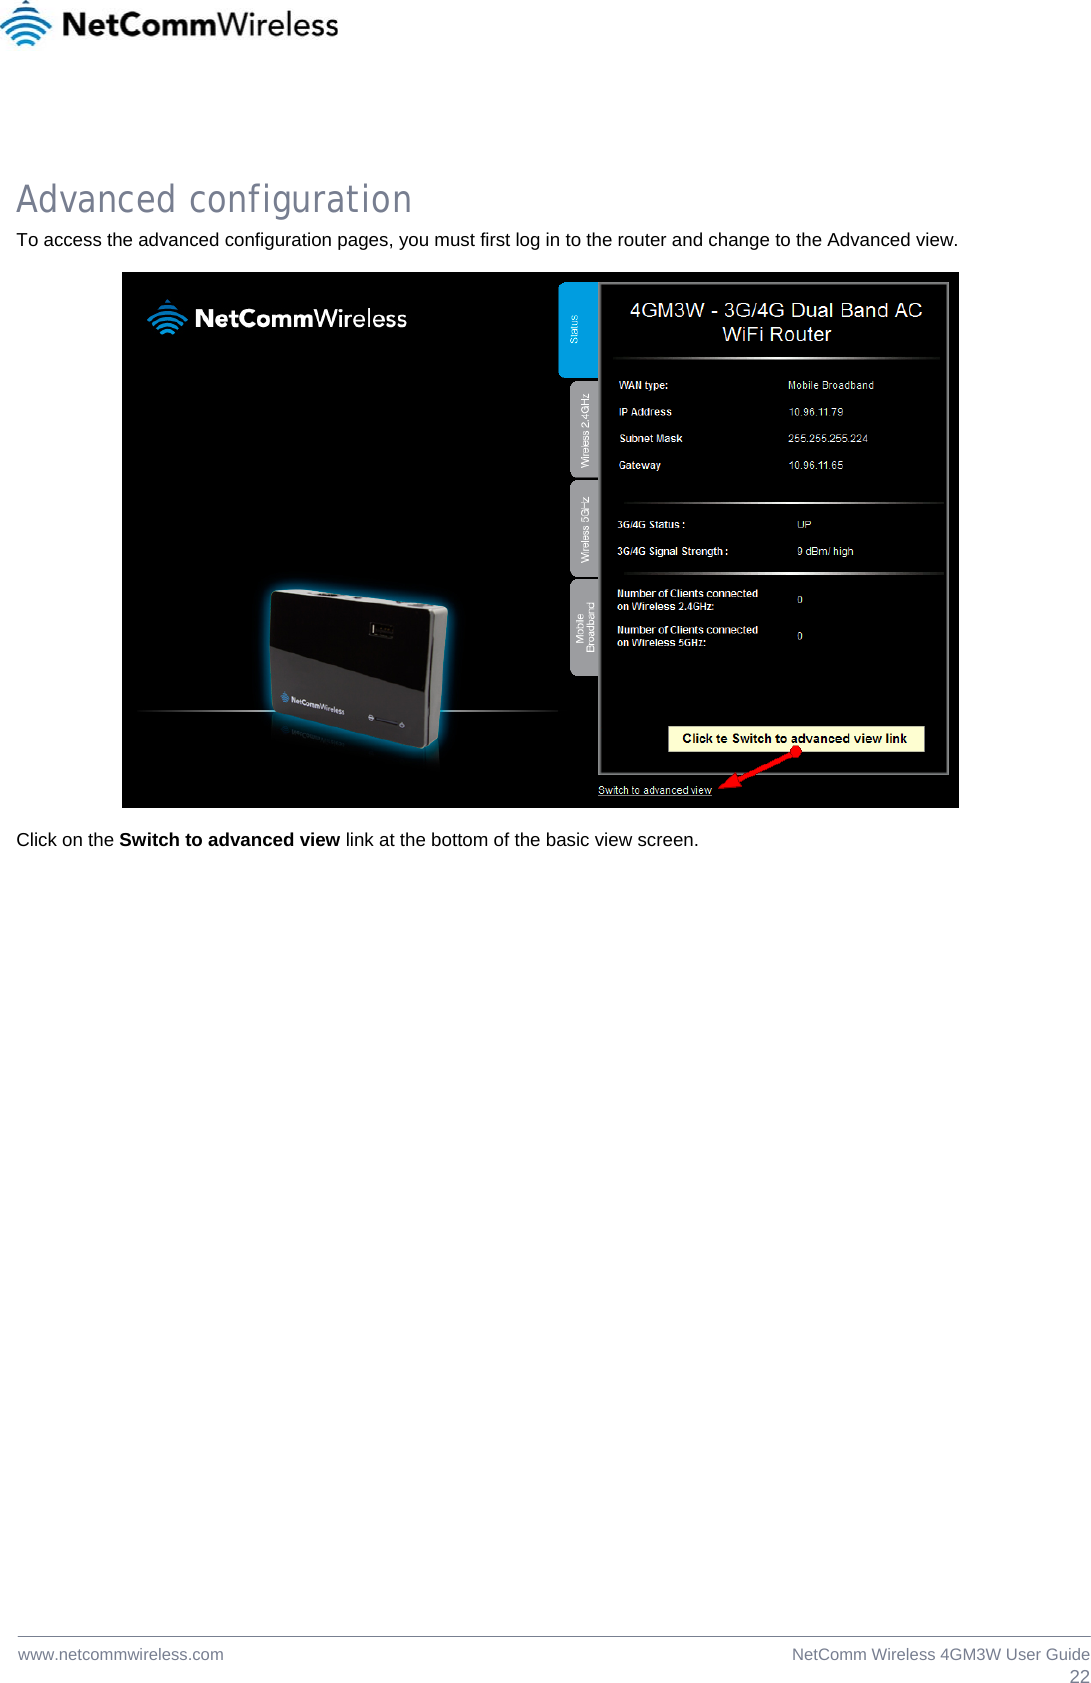  22NetComm Wireless 4GM3W User Guidewww.netcommwireless.com Advanced configuration To access the advanced configuration pages, you must first log in to the router and change to the Advanced view.    Click on the Switch to advanced view link at the bottom of the basic view screen. 